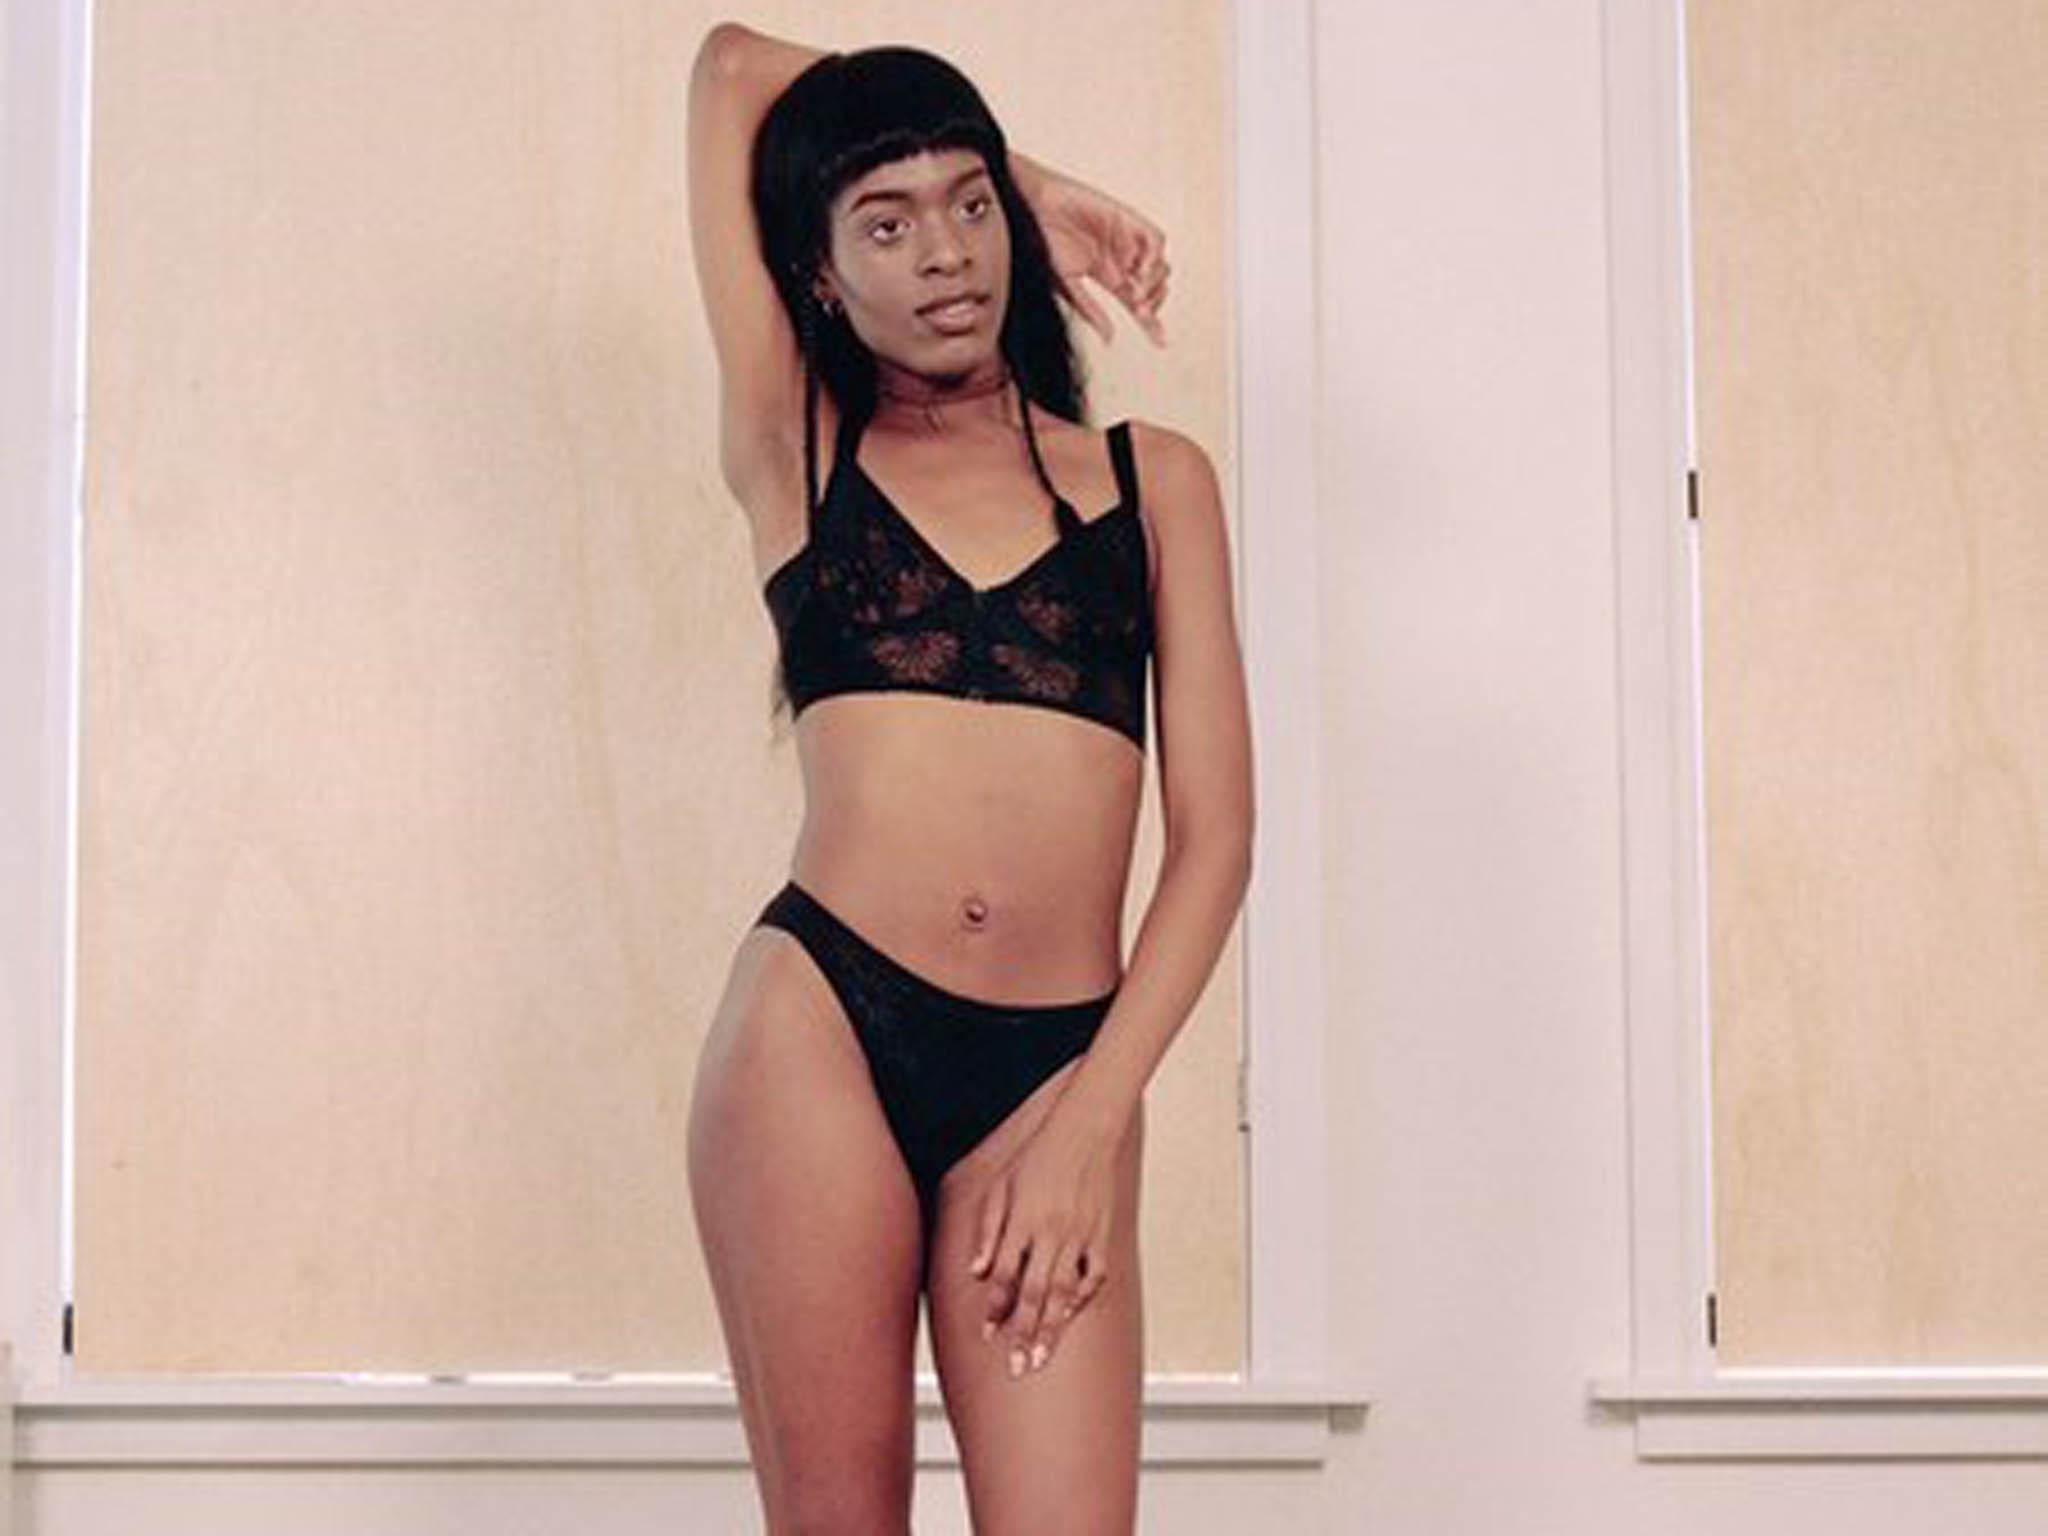 Lonely Lingerie's new body positive campaign fronted by transgender model, The Independent